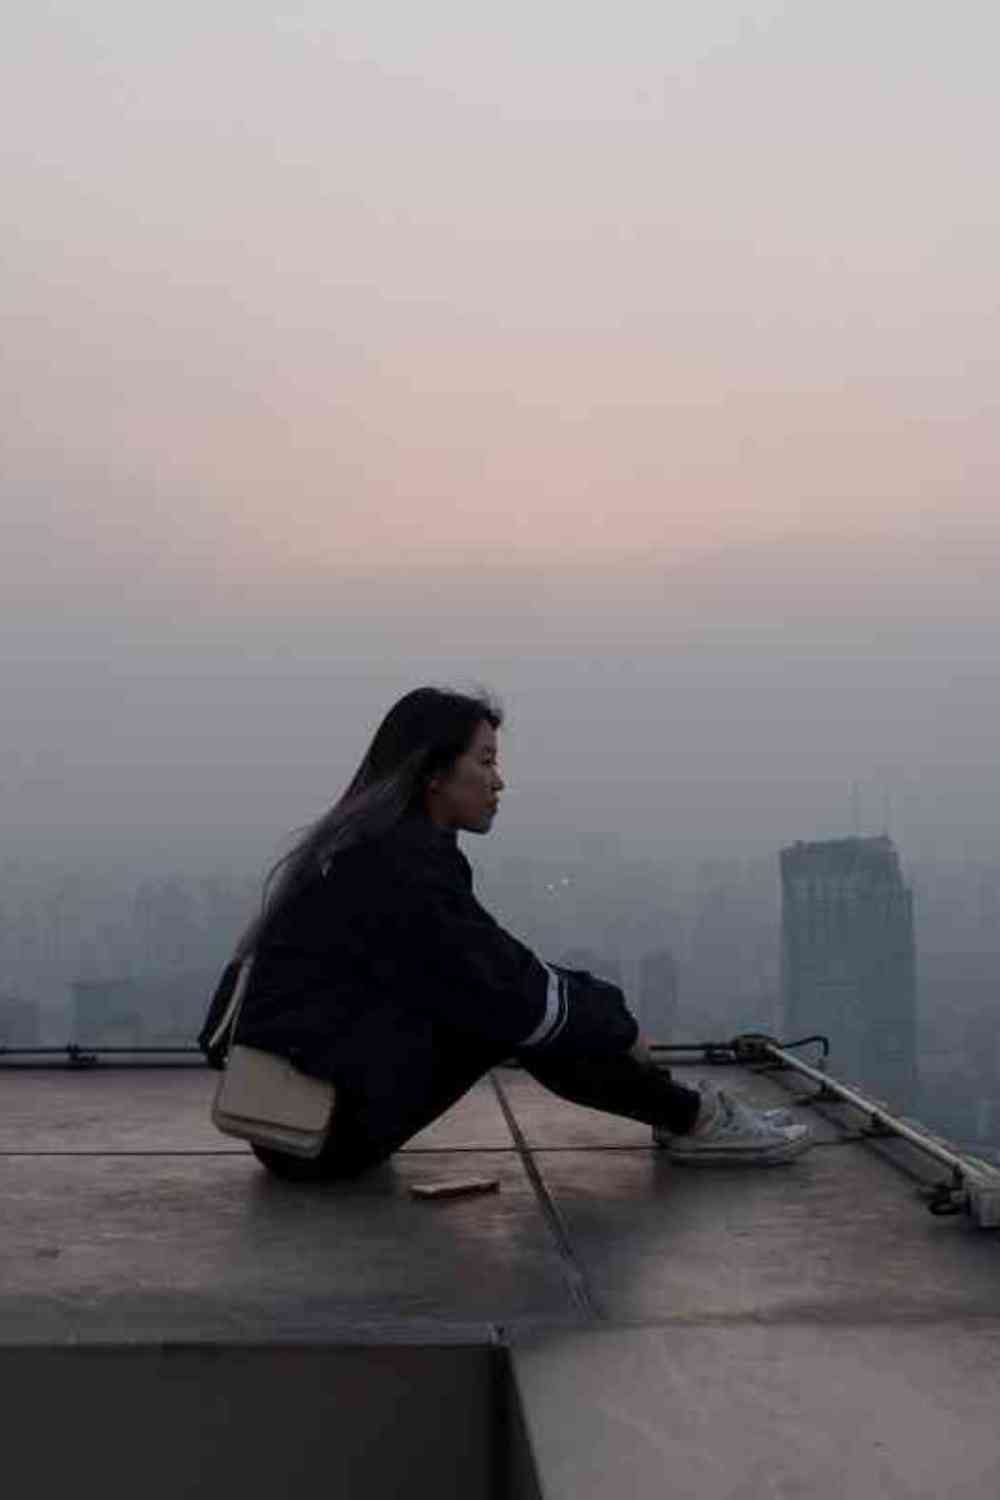 post-travel blues girl sitting on rooftop on a cloudy day looking pensive